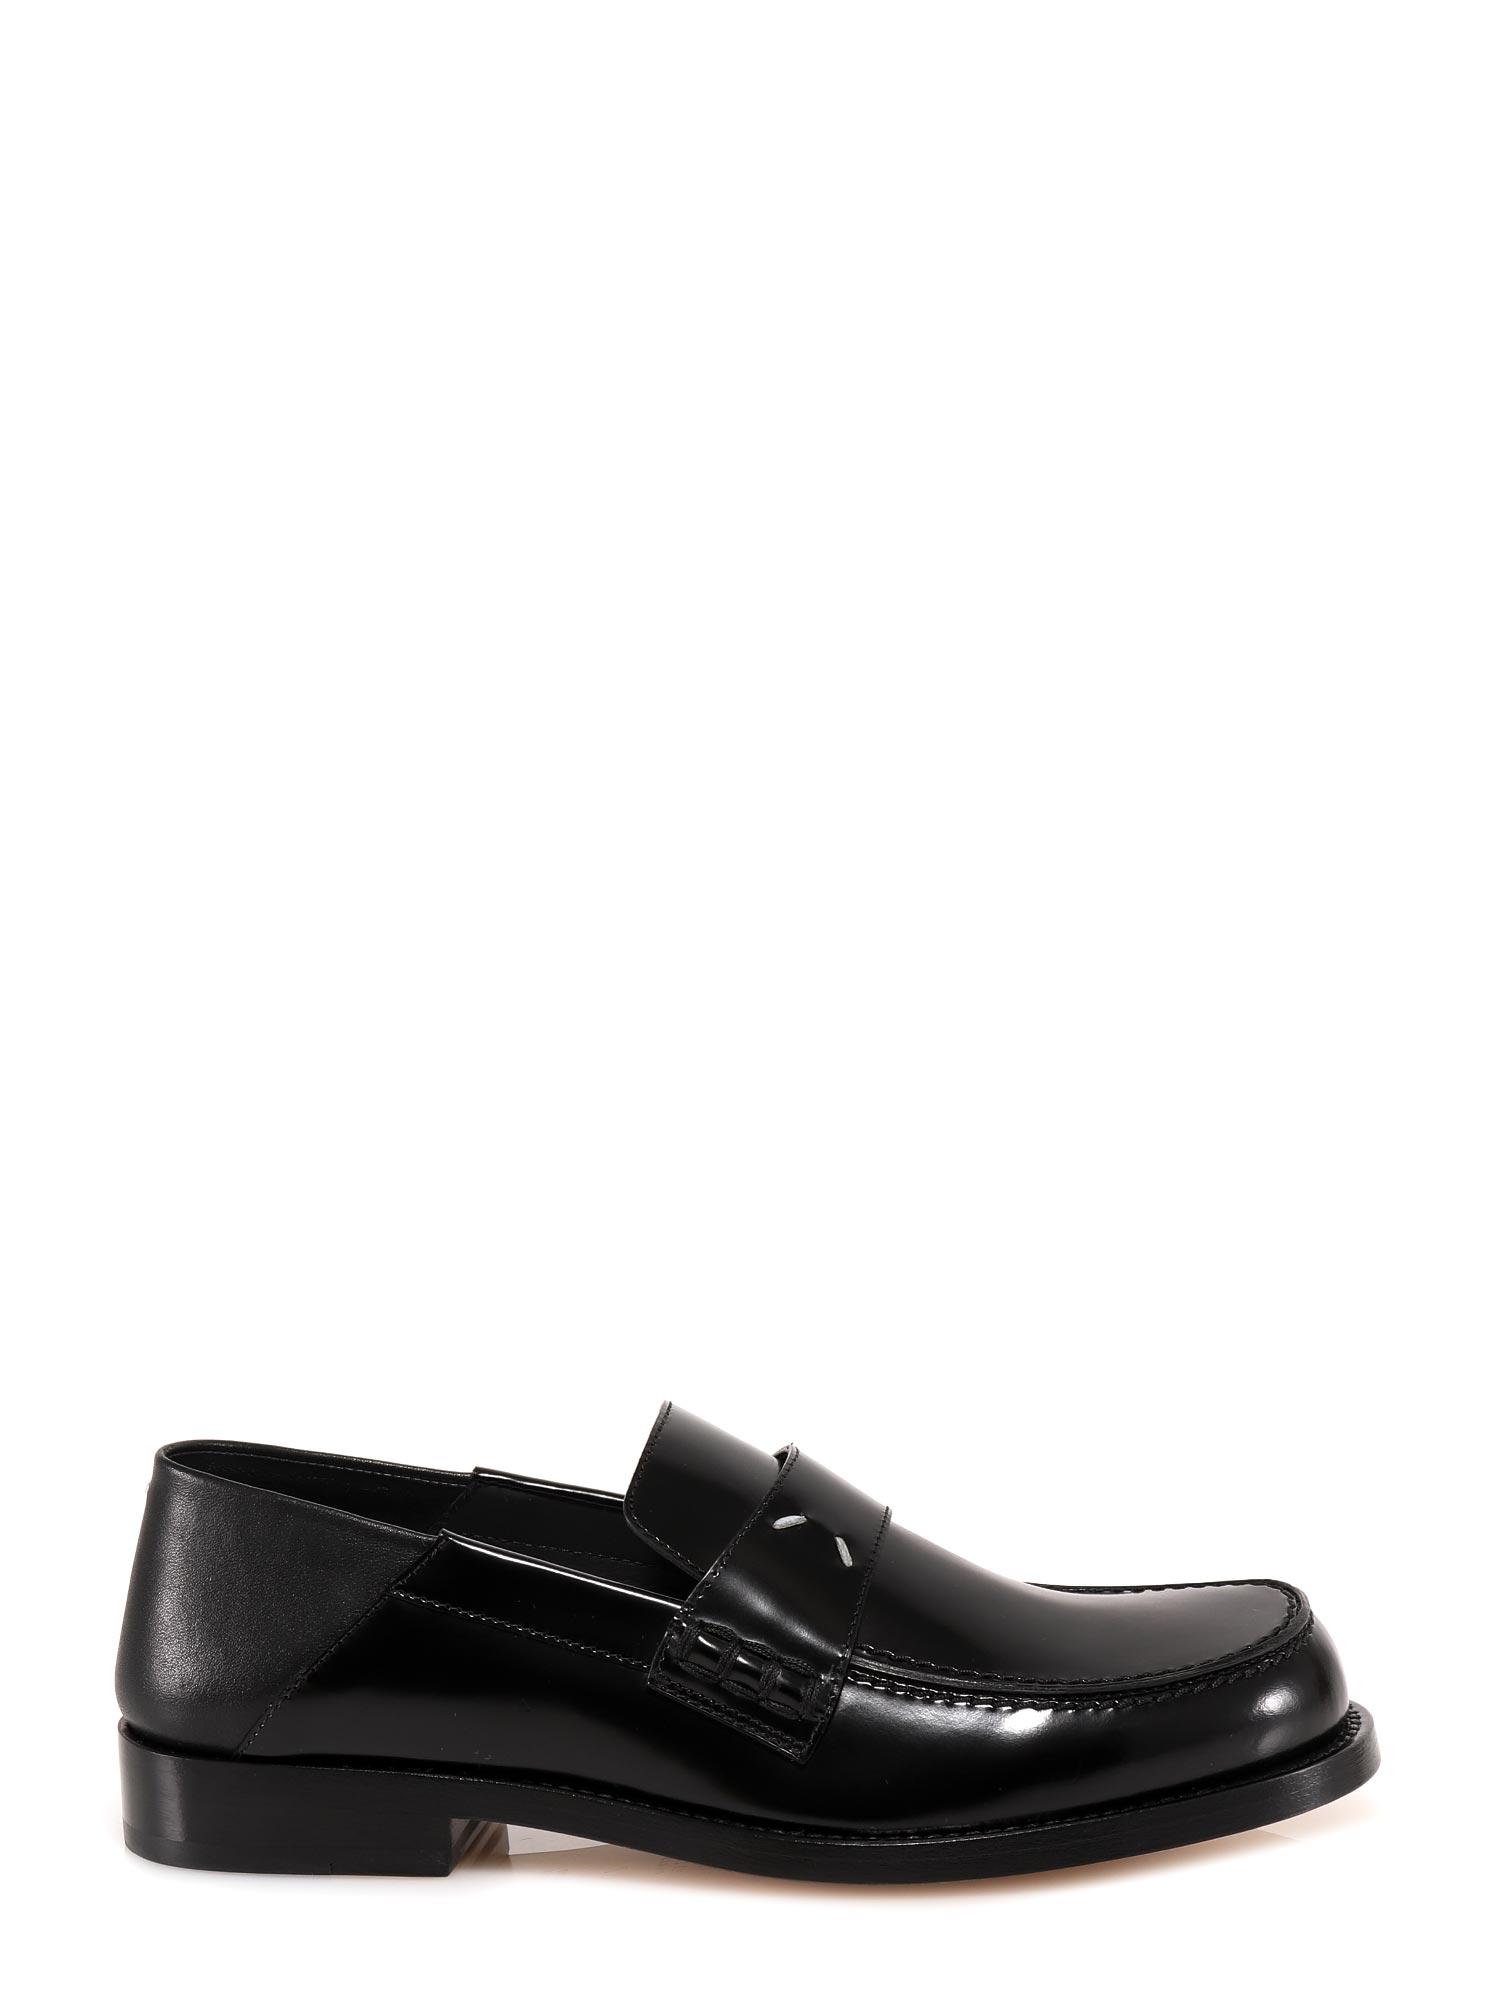 Maison Margiela Leather Tabi 4-stitches Loafers in Black - Lyst